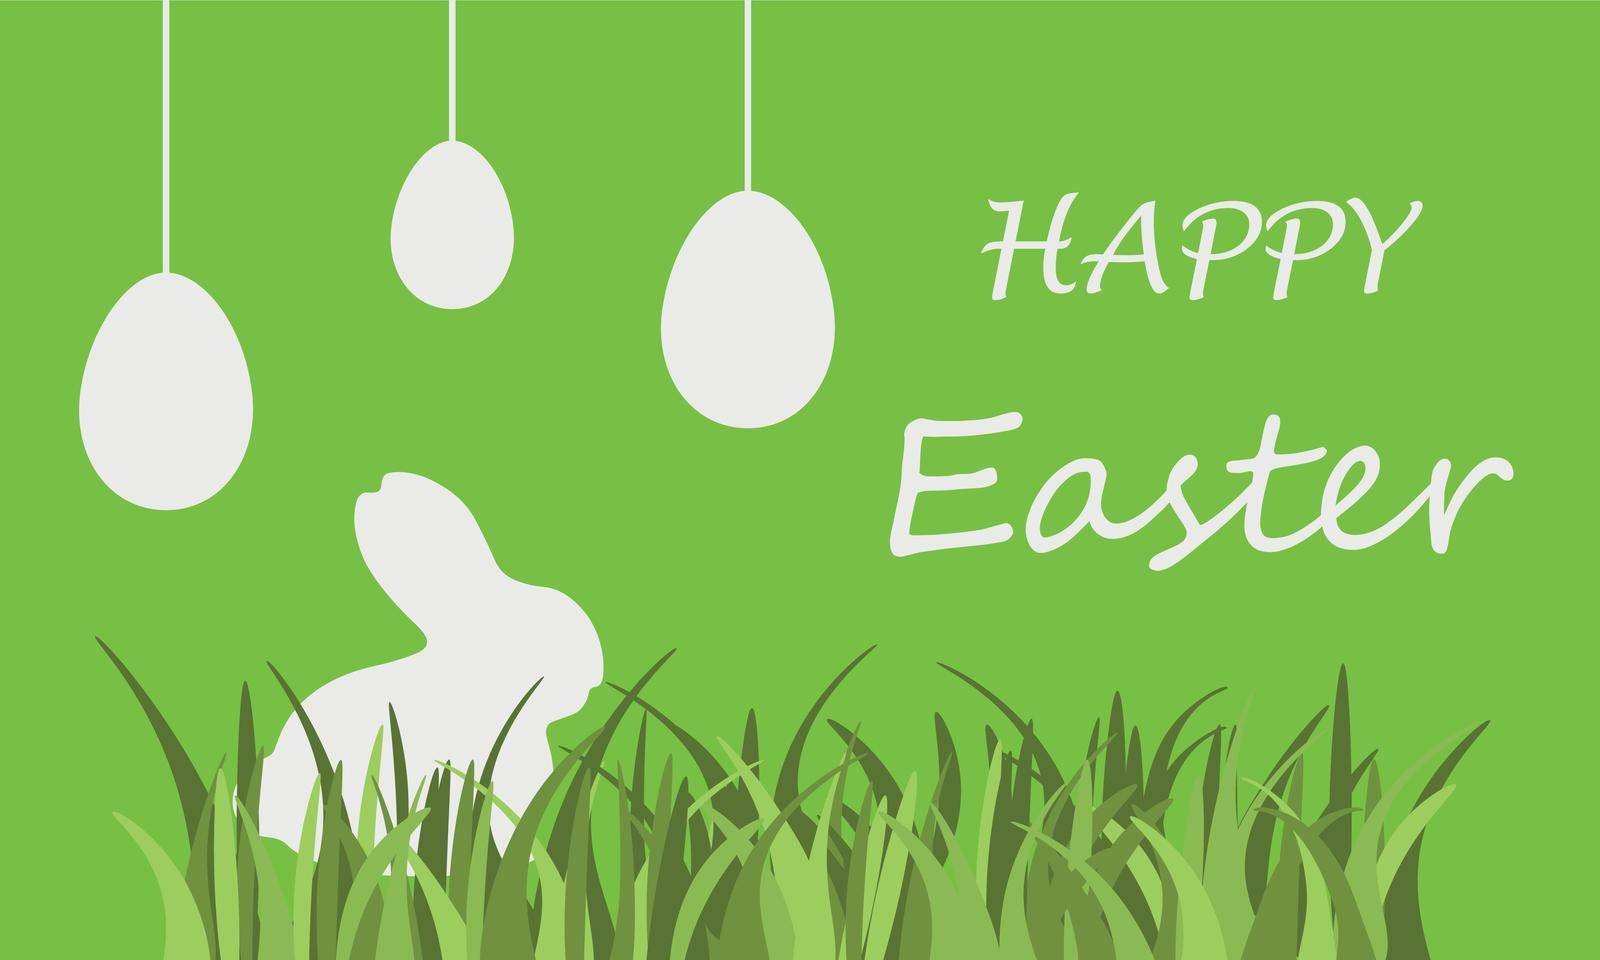 Happy Easter. Greeting card with a silhouette of an Easter bunny and Easter eggs on a green background. Easter bunny in the grass. Vector illustration.